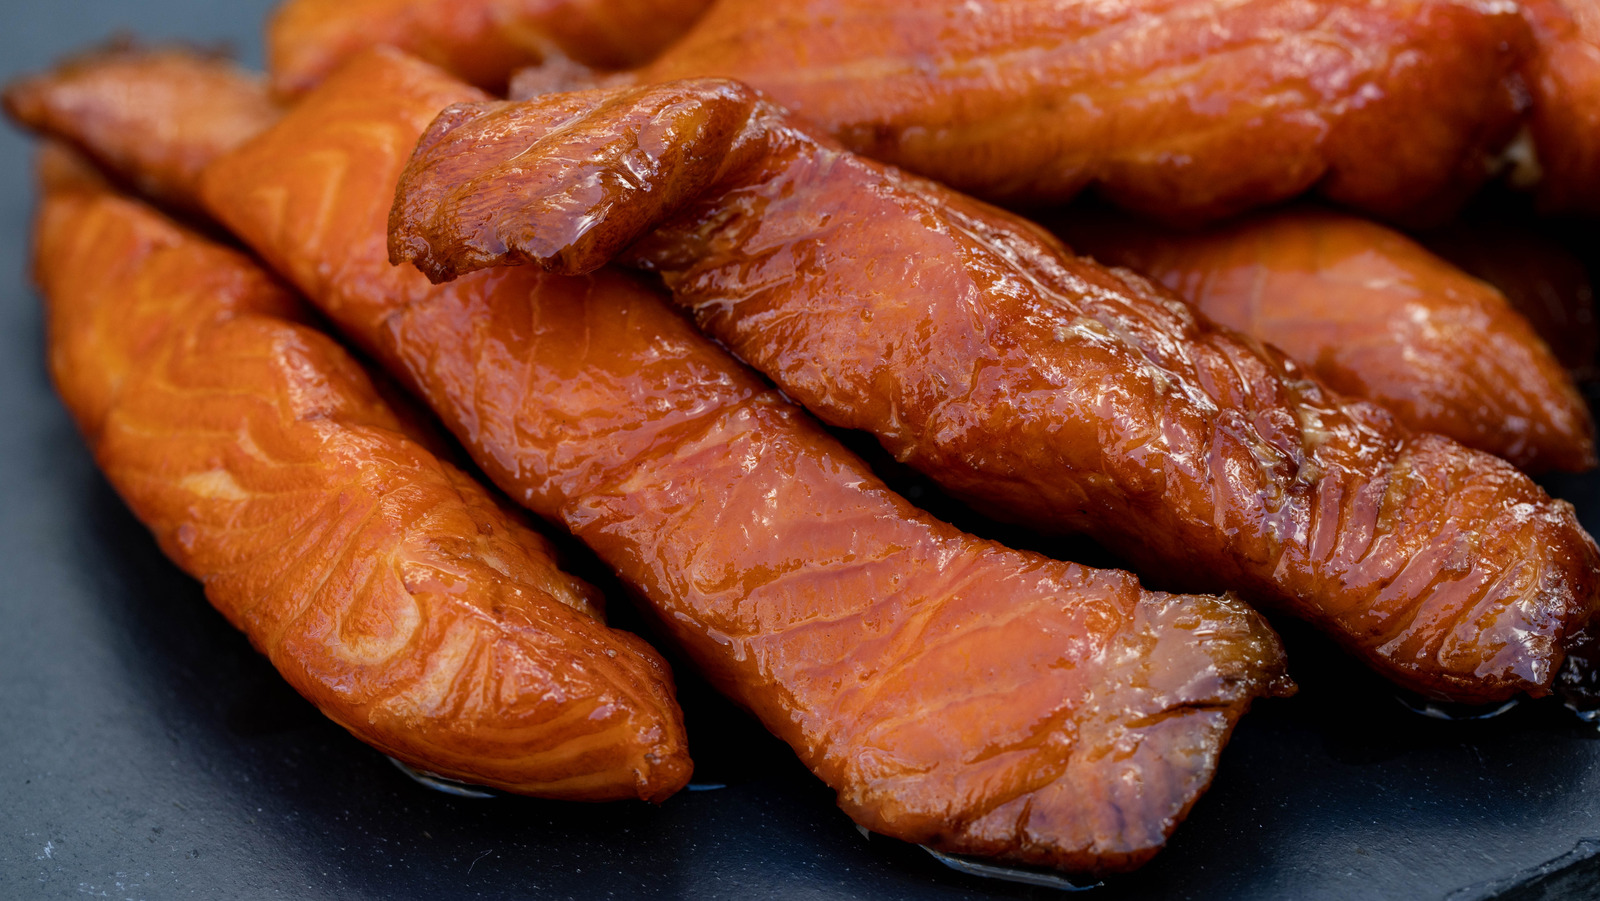 https://www.tastingtable.com/img/gallery/is-salmon-candy-really-what-it-sounds-like/l-intro-1665087956.jpg